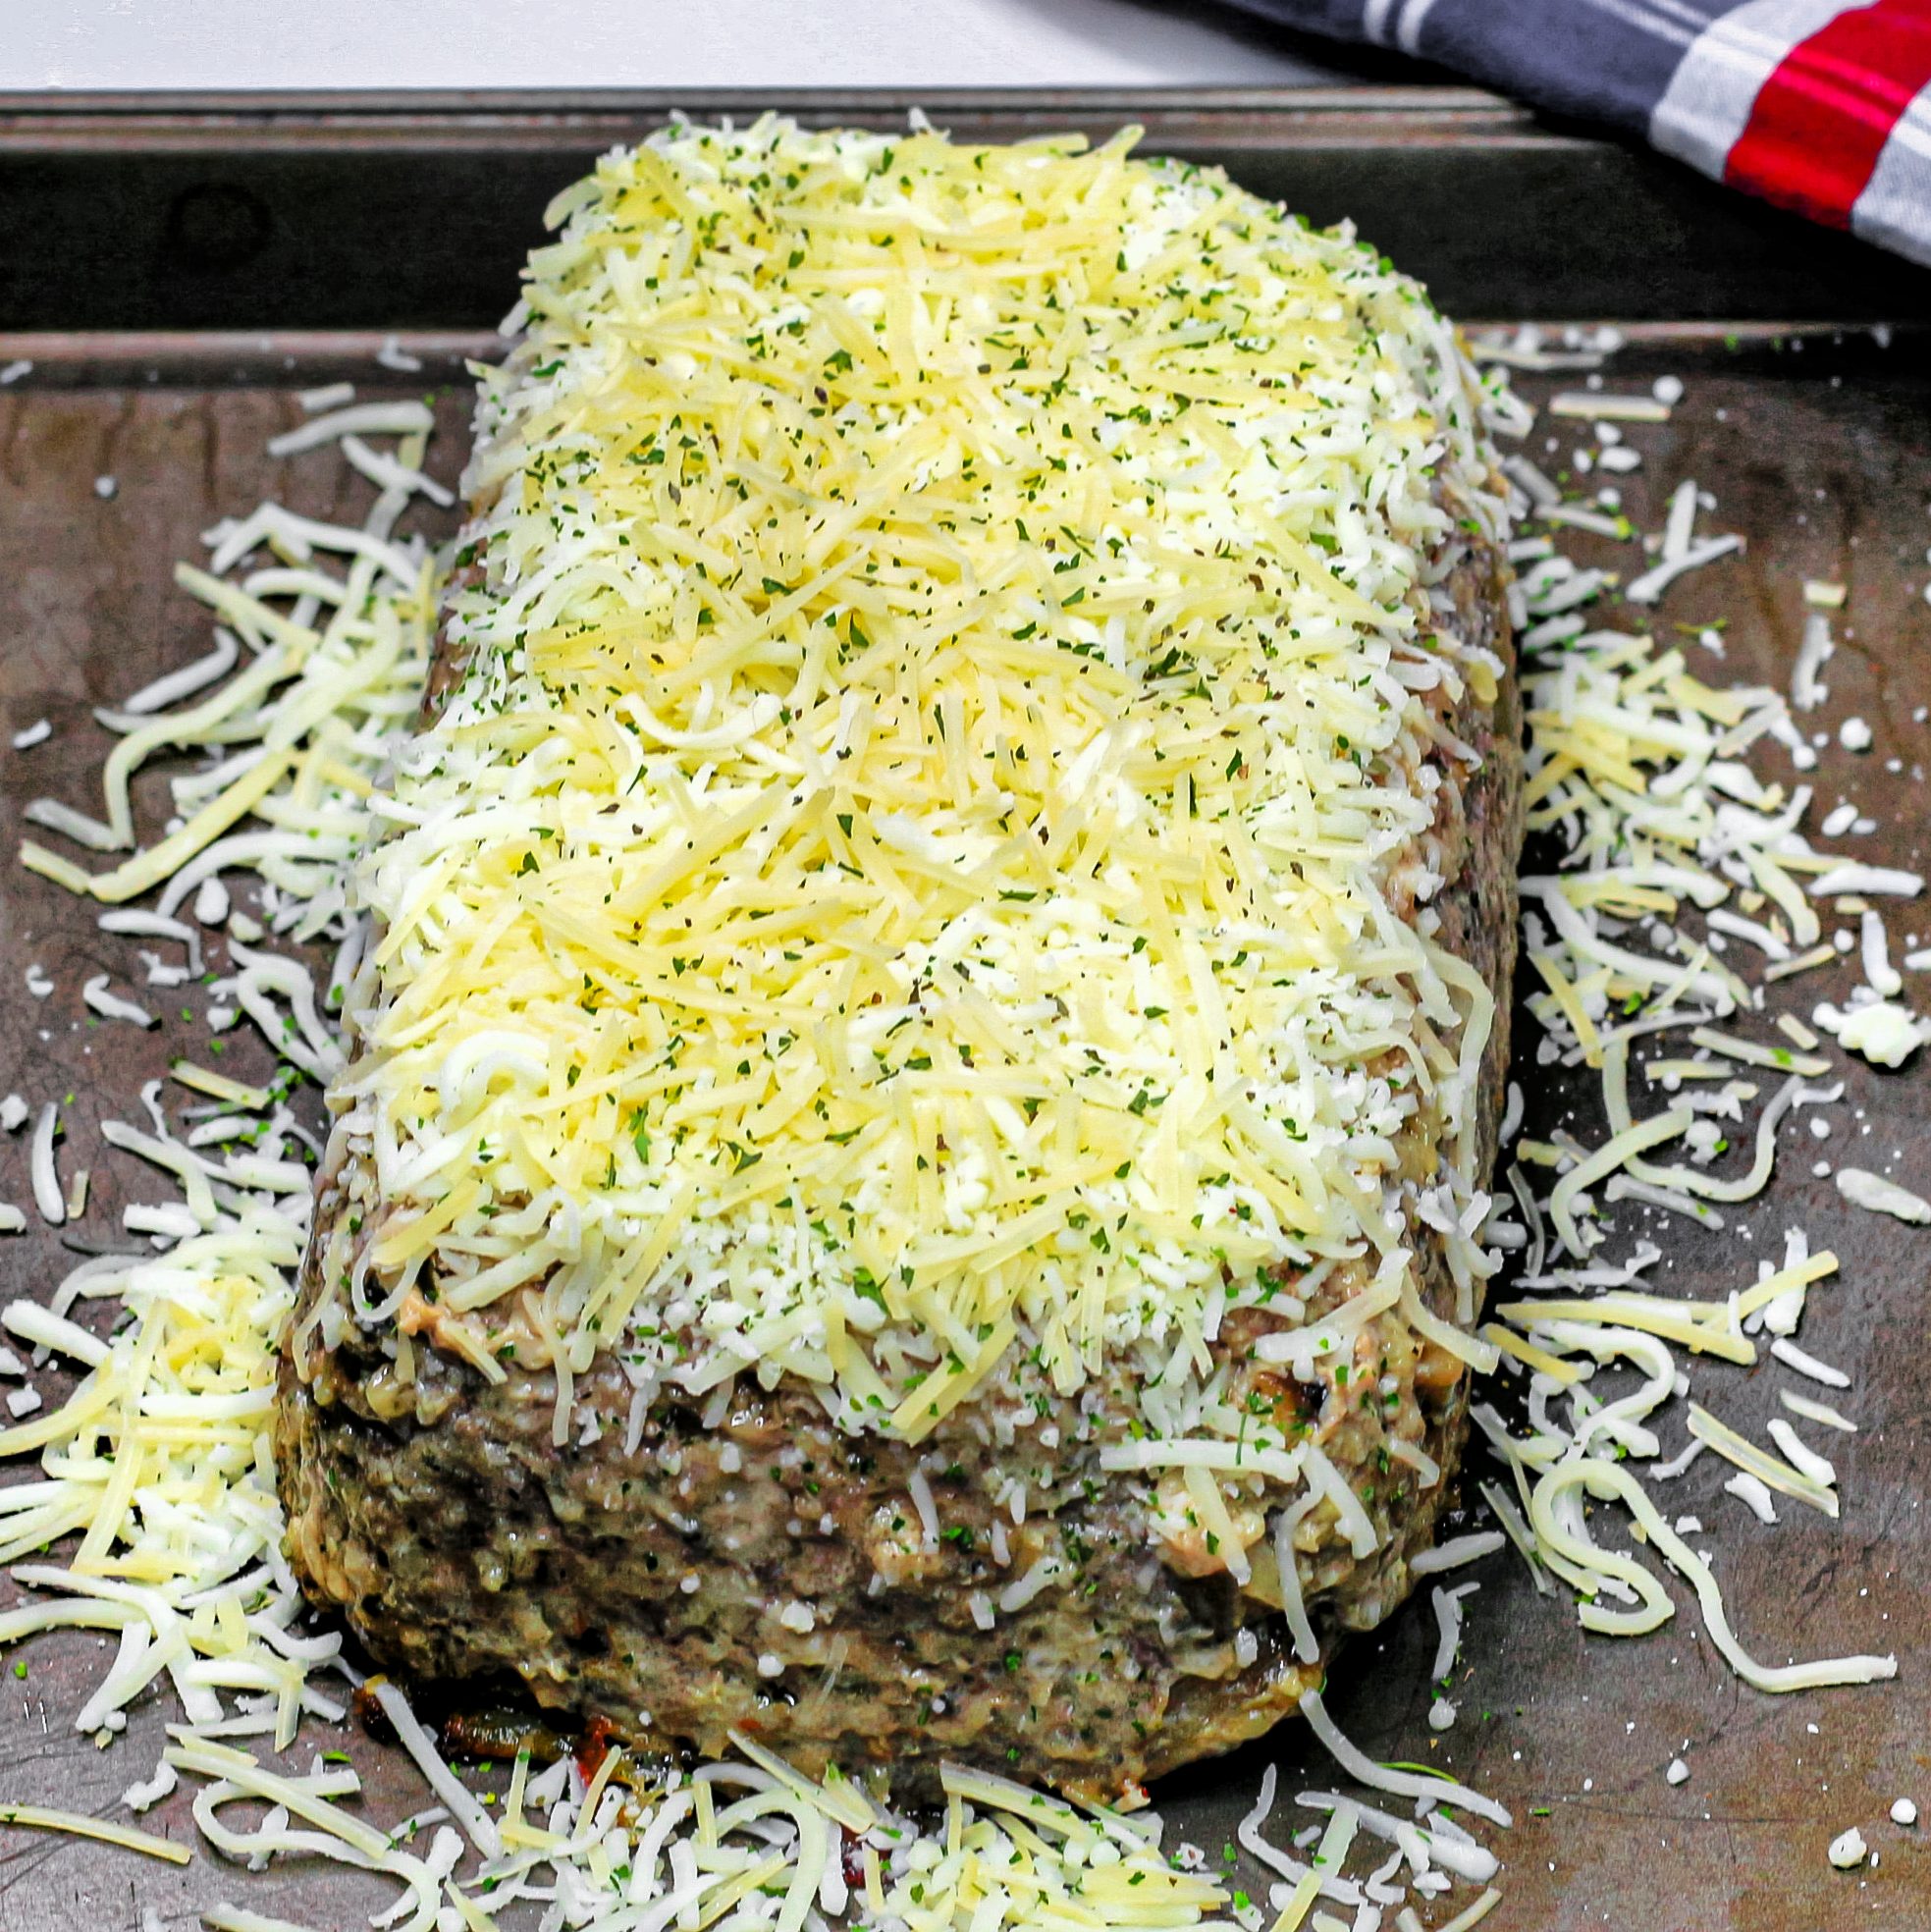 Remove from the oven and top with the remaining cheese and sprinkle a little dry basil over the top.